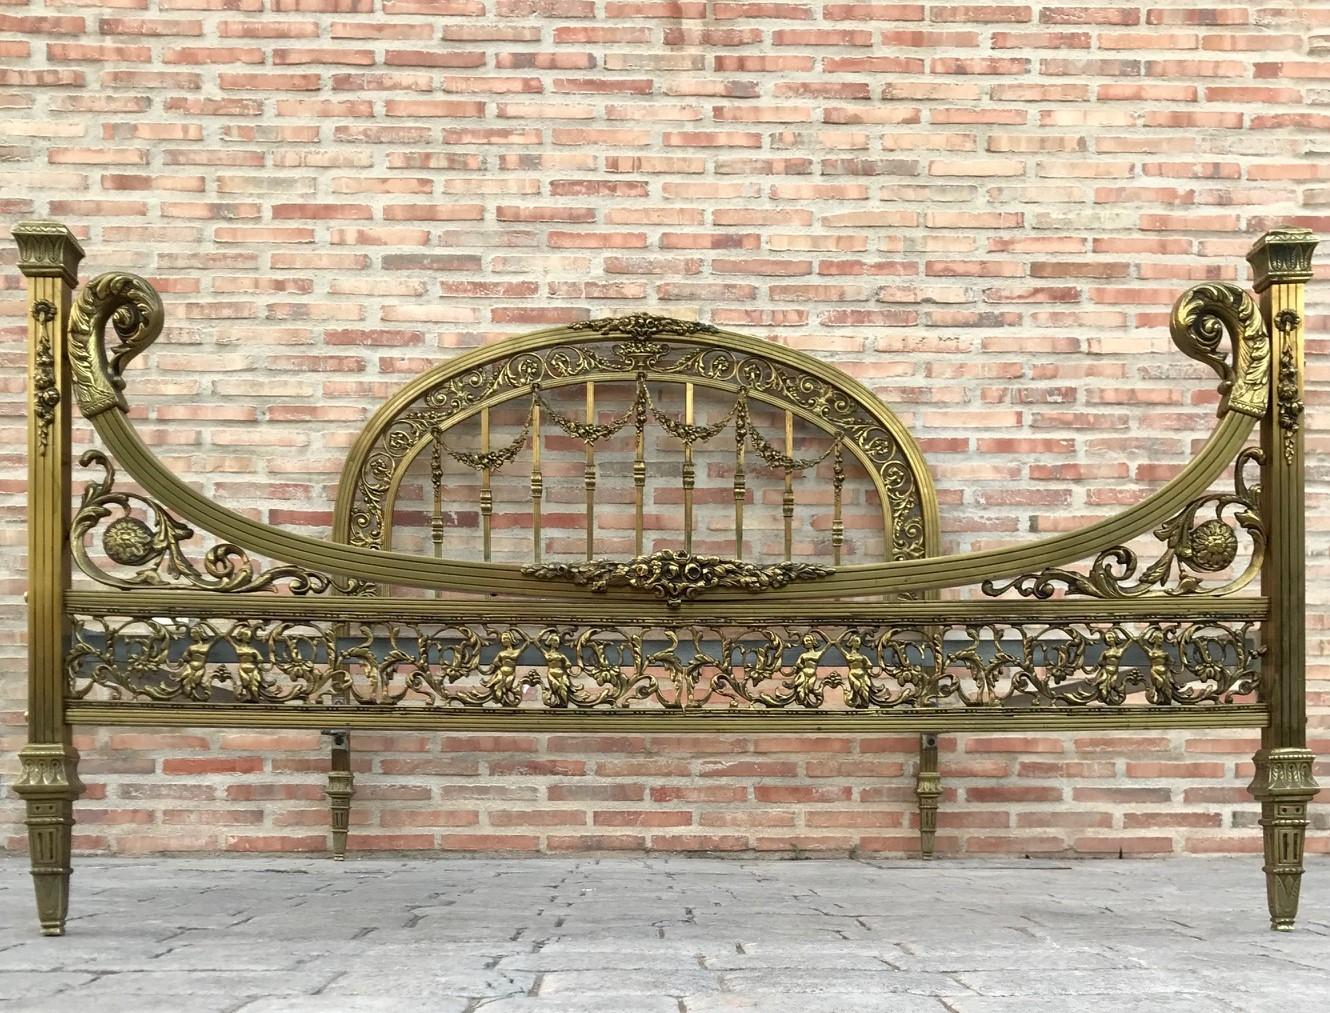 Beautiful and impressive 19th century full bedroom
French belle époque bronze, iron, brass and glass

You can change the bed slats for adapt it a queen bed.